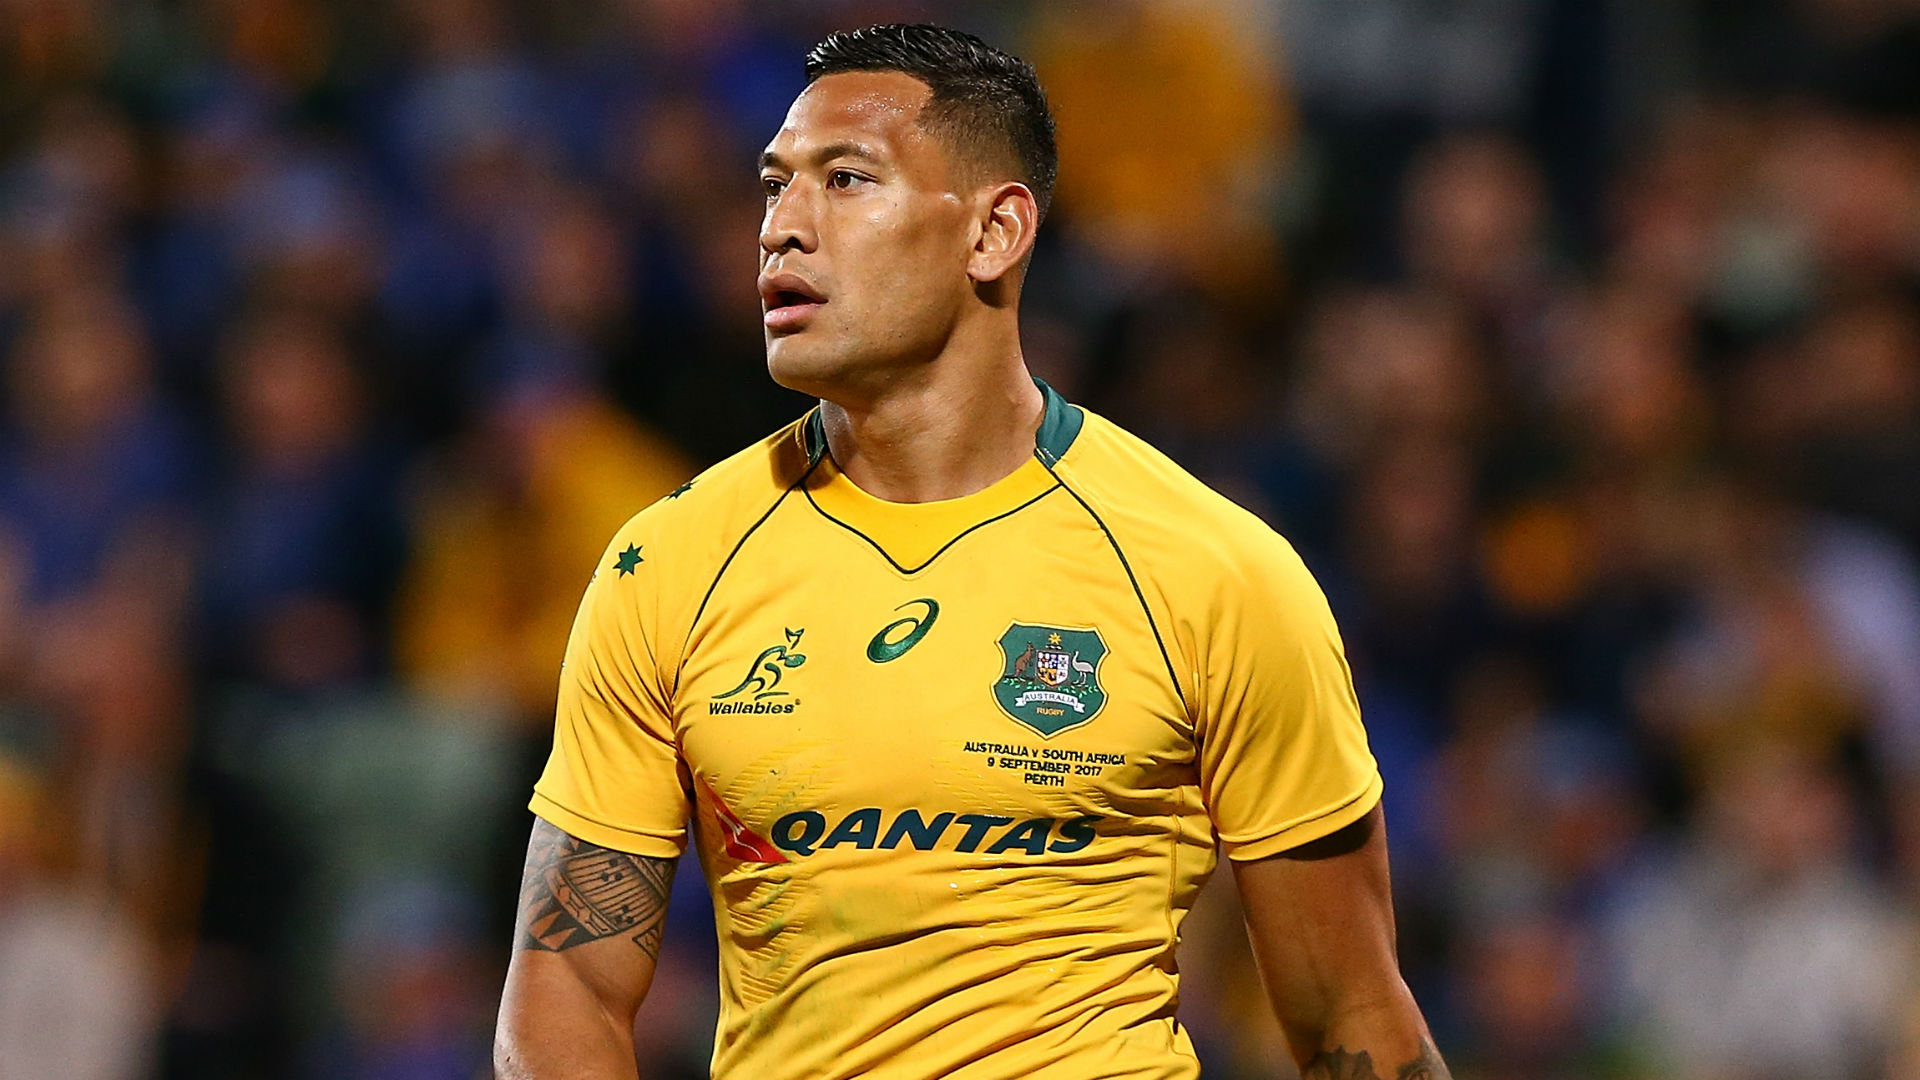 Rugby Australia will hold a weekend hearing to determine whether its decision to terminate Israel Folau's contract can be upheld.